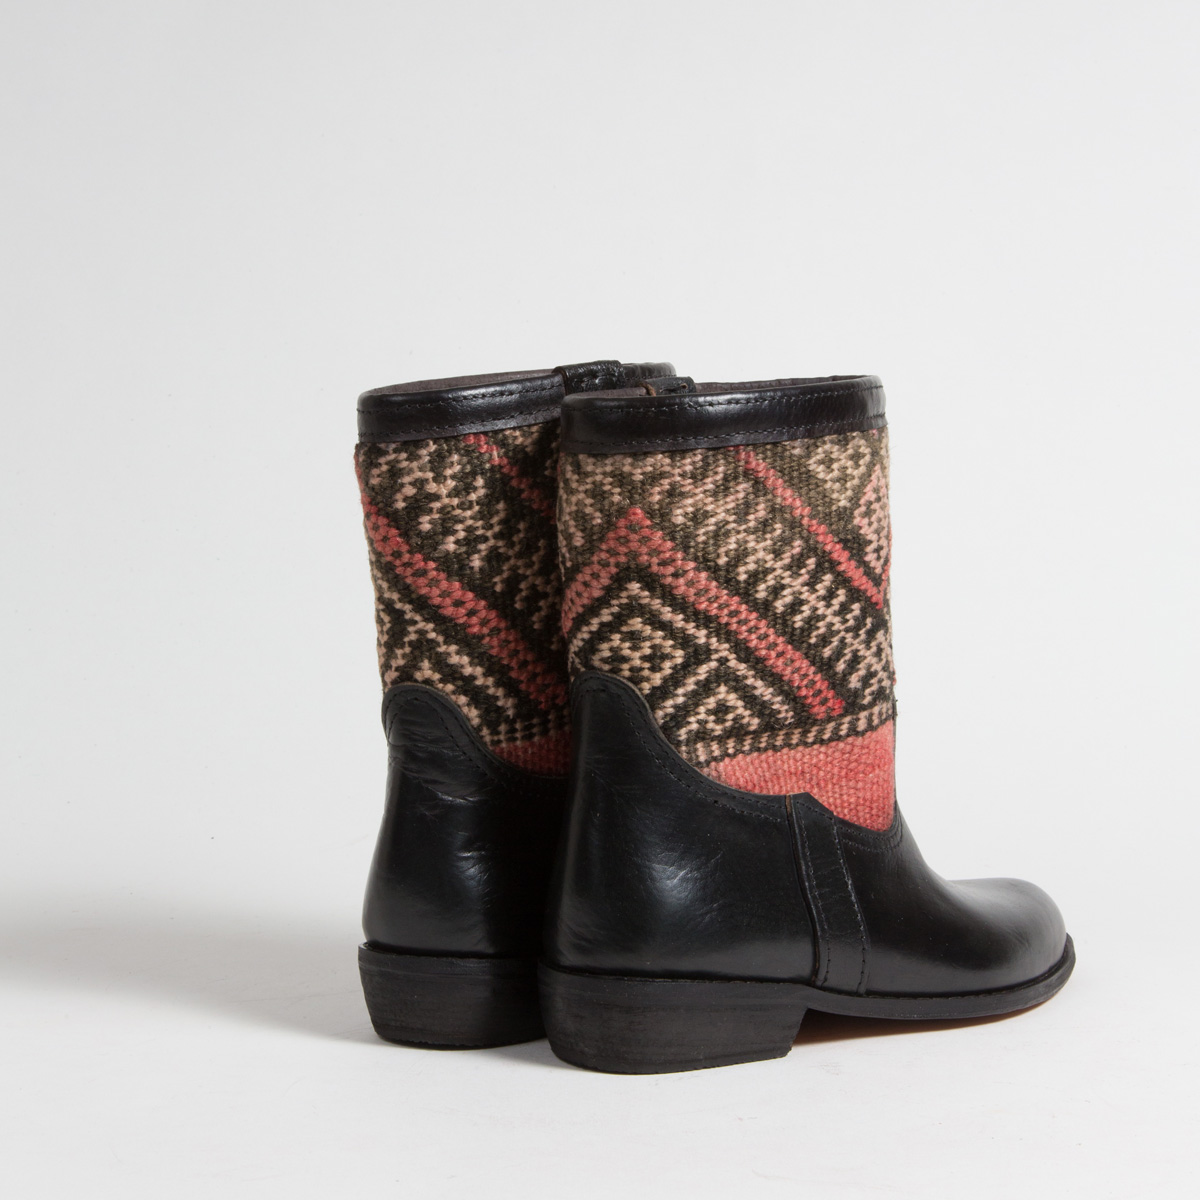 Bottines Kilim cuir mababouche artisanales (Réf. RPN4-37)